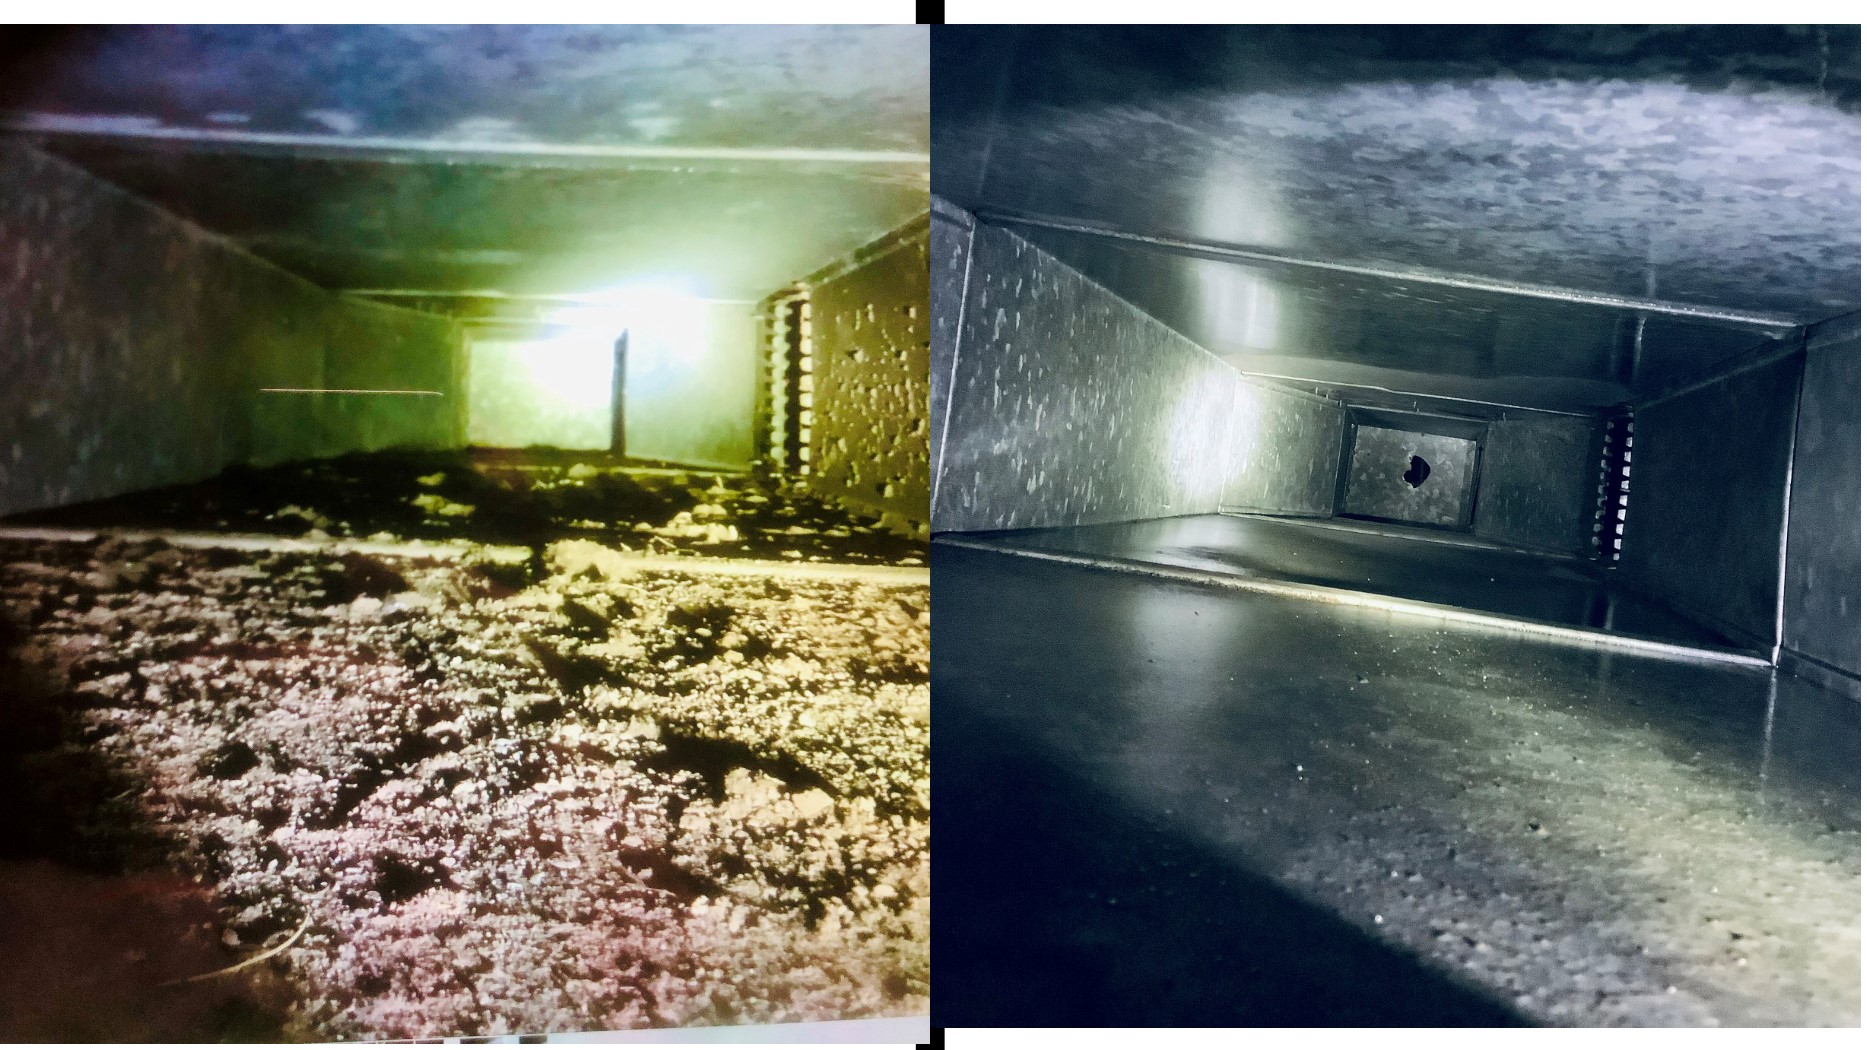 We clean and disinfect air ducts. Here's a before and after of a recent job in Virginia.